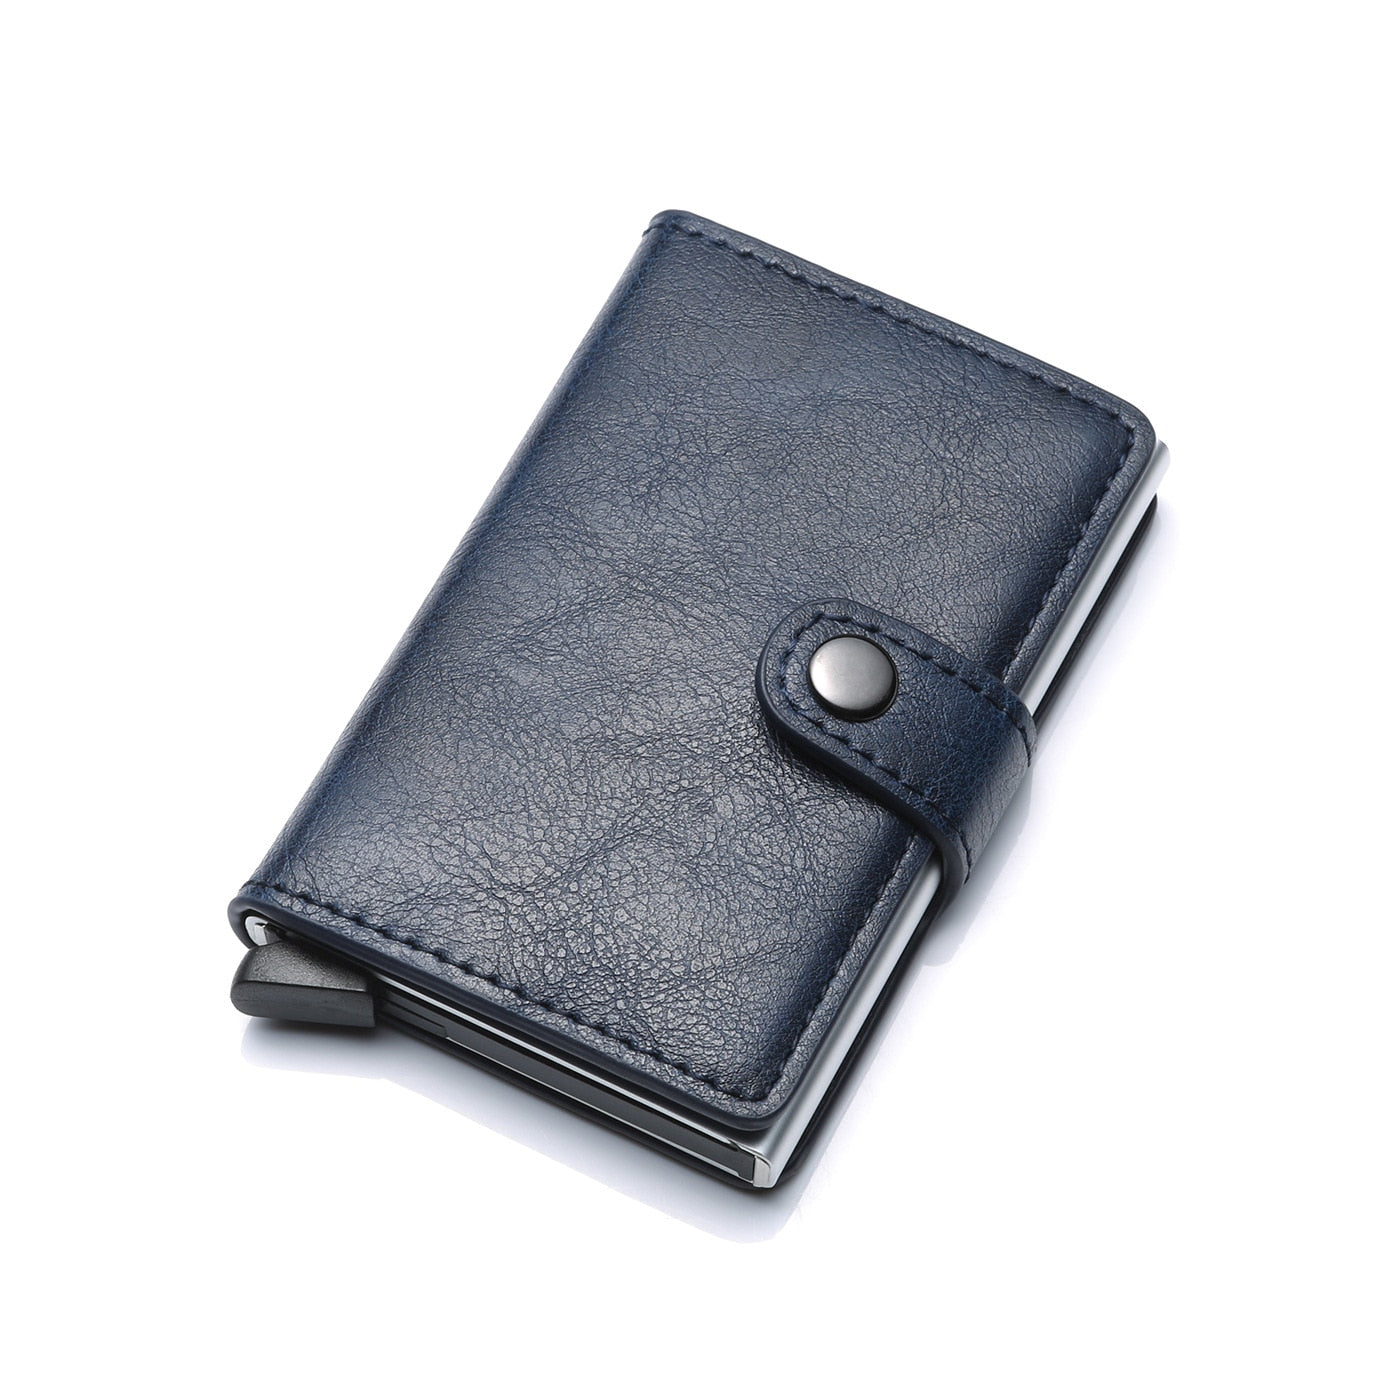 ID Credit Bank Card Holder Wallet Luxury Brand Men Anti Rfid Blocking Protected Magic Leather Slim Mini Small Money Wallets Case - enoughdream.com